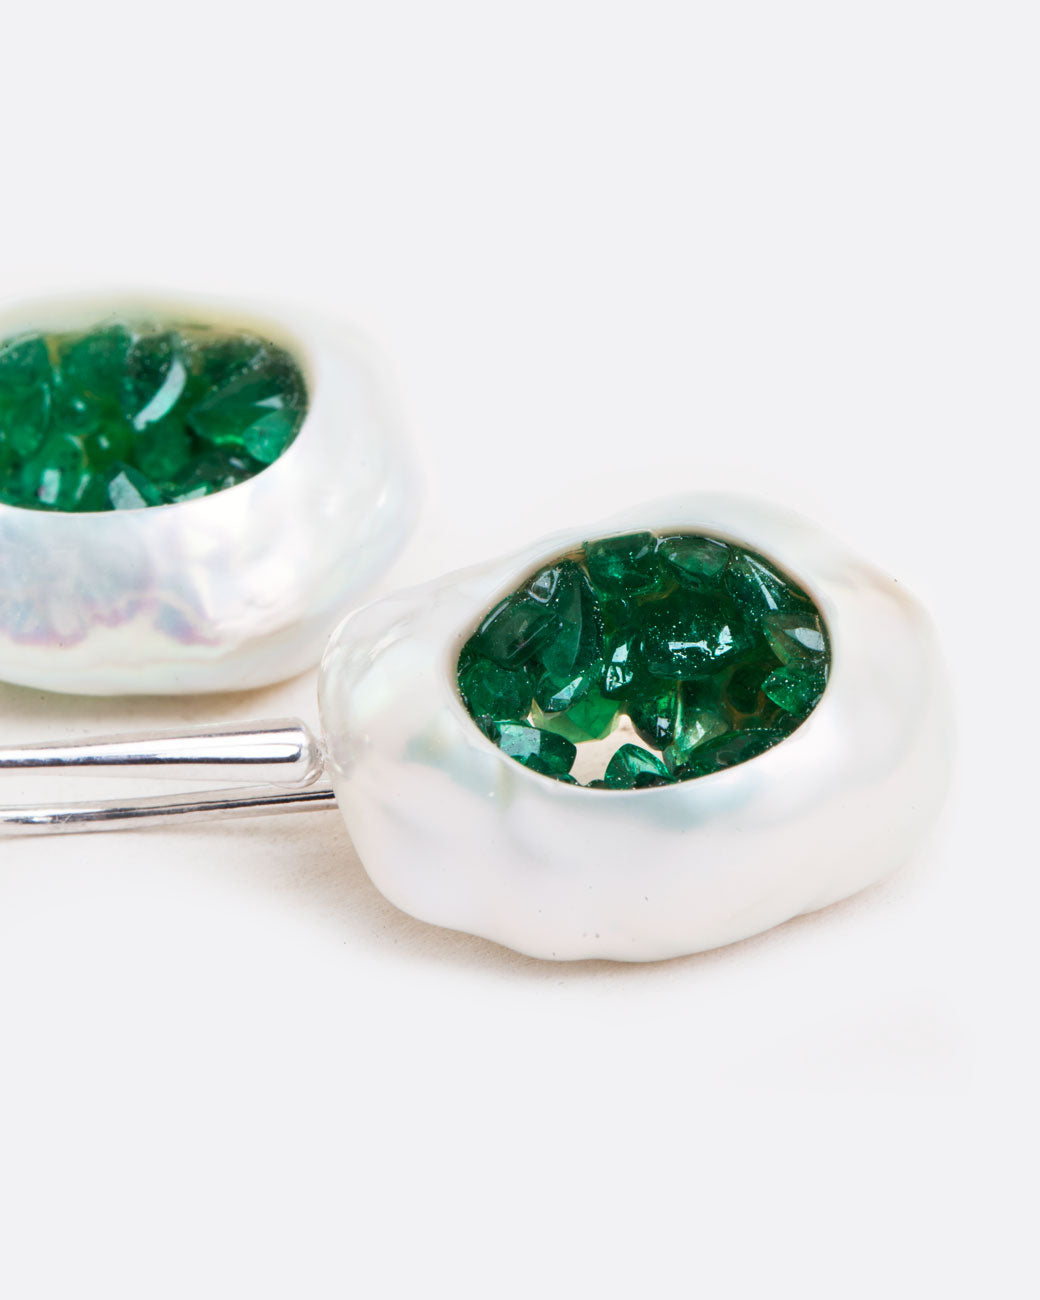 two dangle hook earrings in white gold laying on a white surface. the dangle part is a pearl that has had a hole carved out in the middle and then lined with emeralds, to create a geode like appearance.